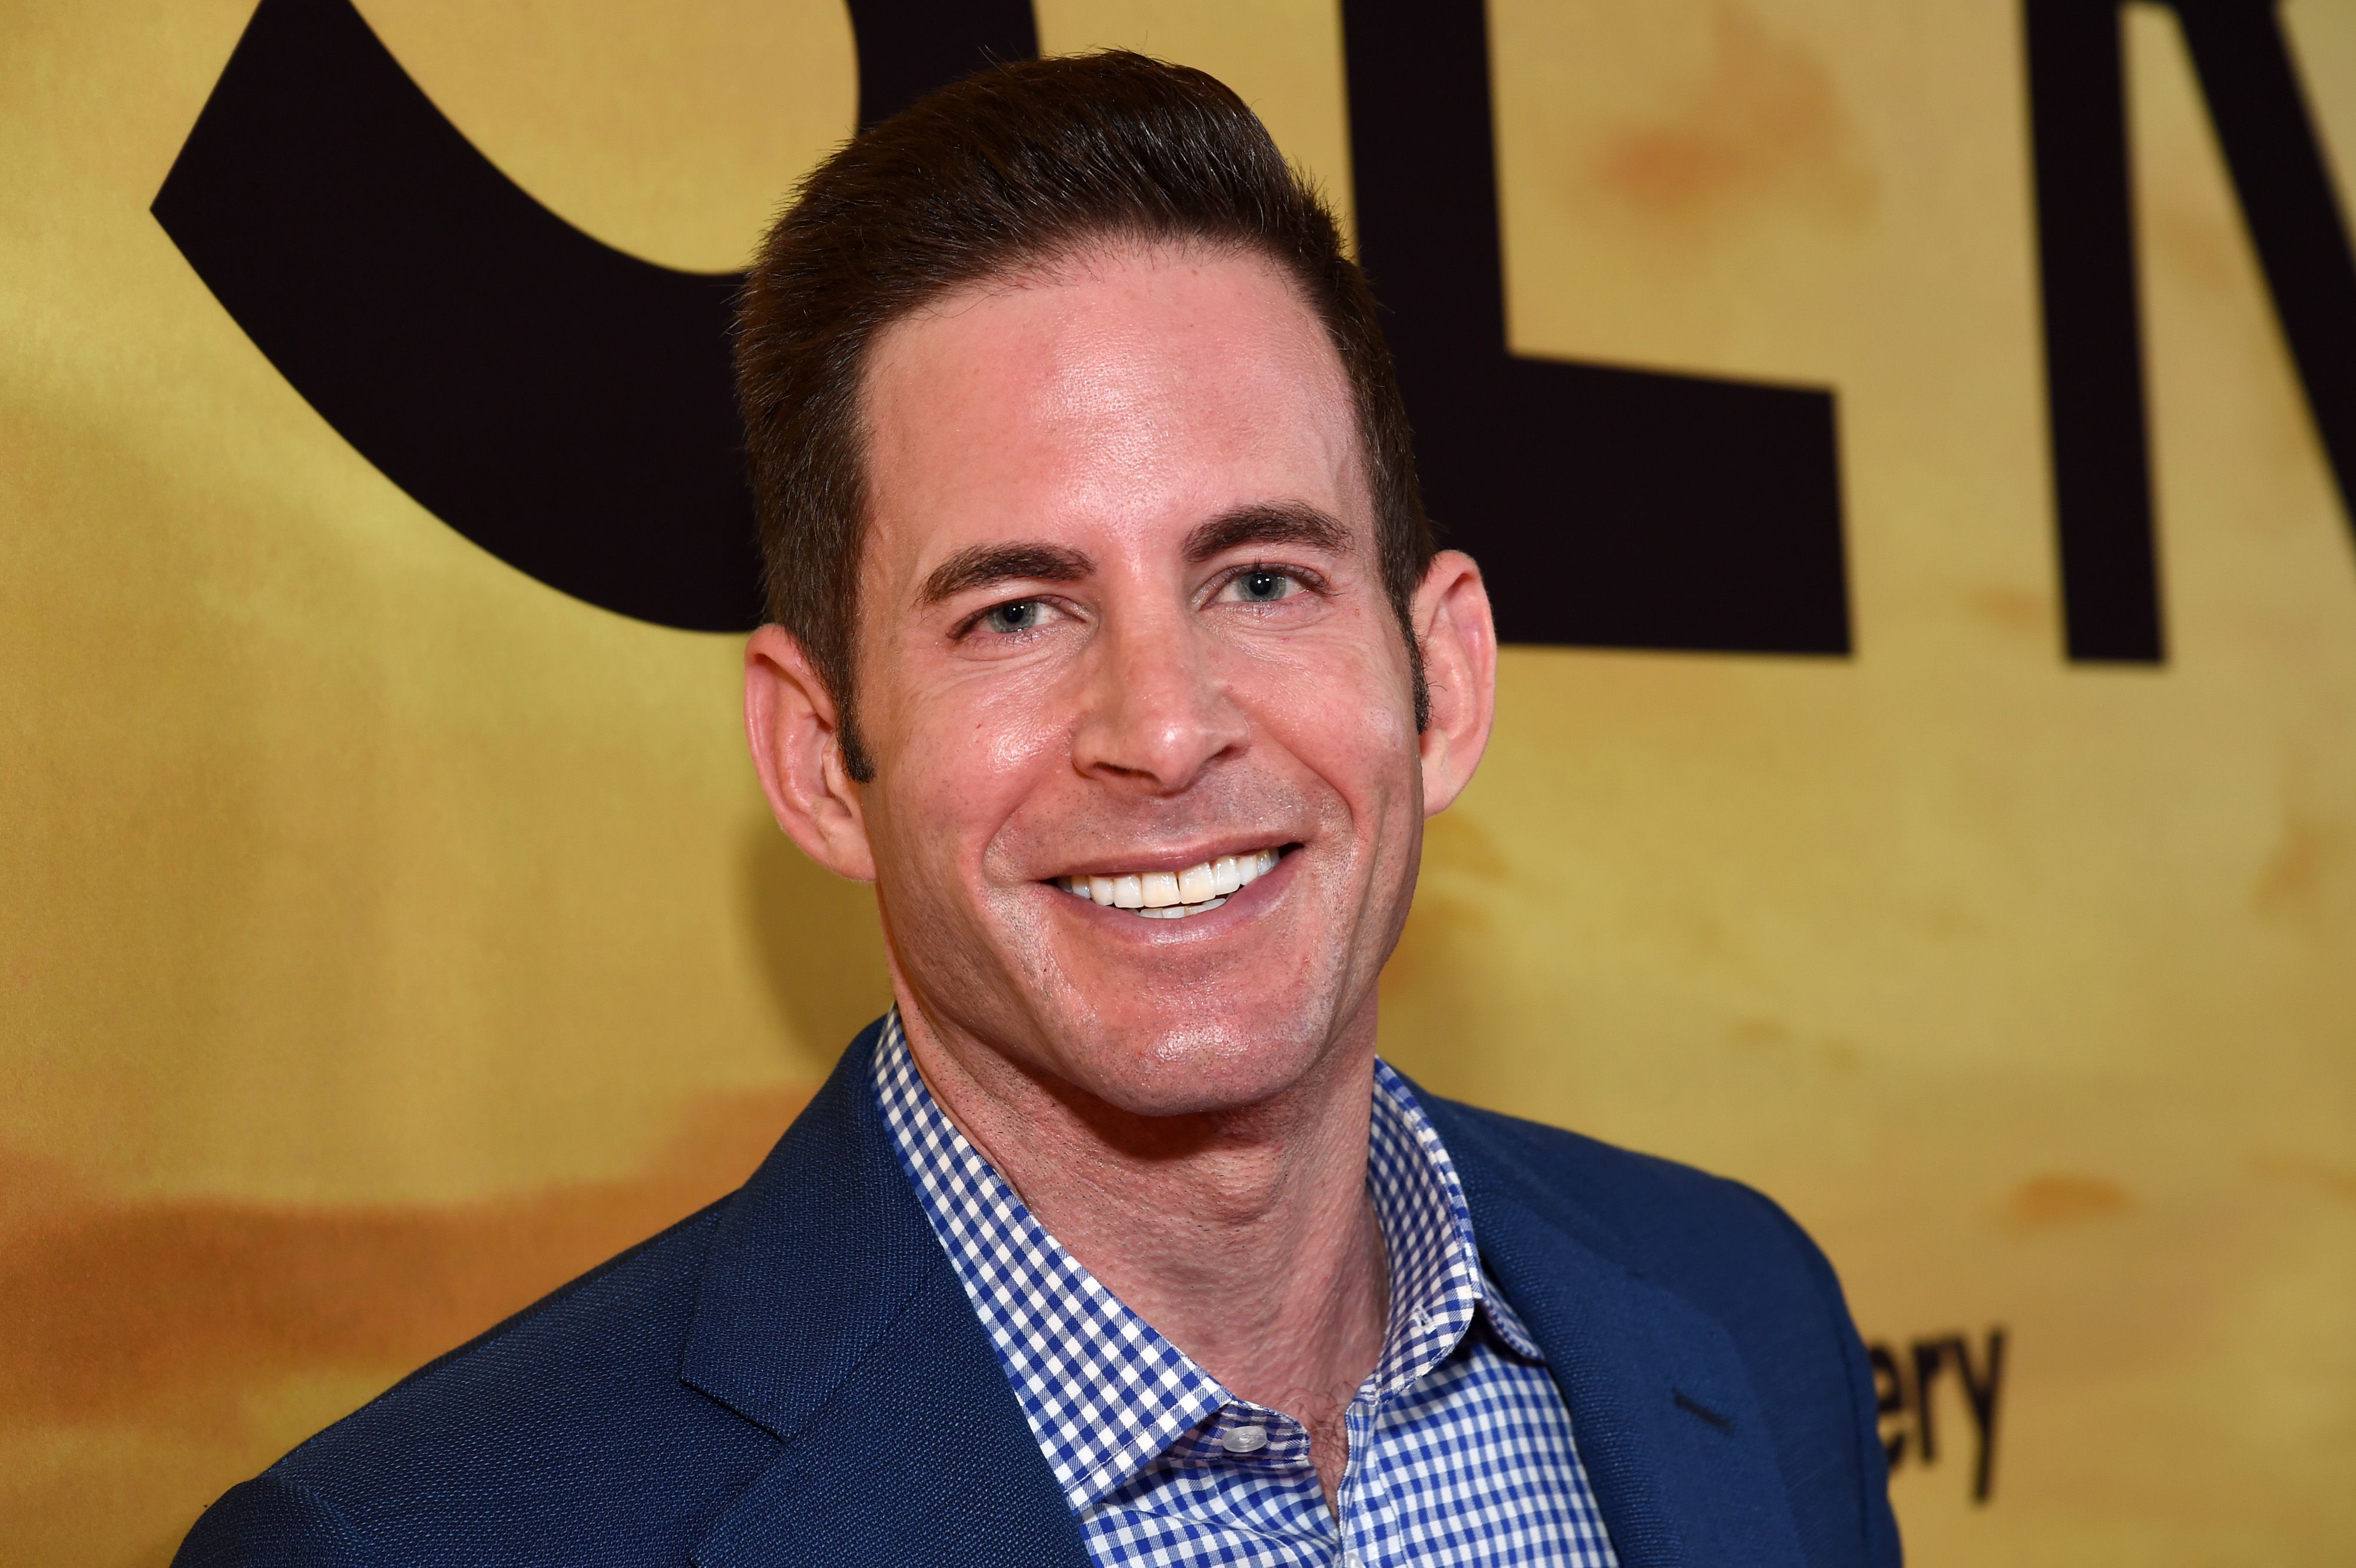 Tarek El Moussa at Discovery's Serengeti premiere on July 23, 2019, in Beverly Hills, California | Photo: Michael Kovac/Getty Images